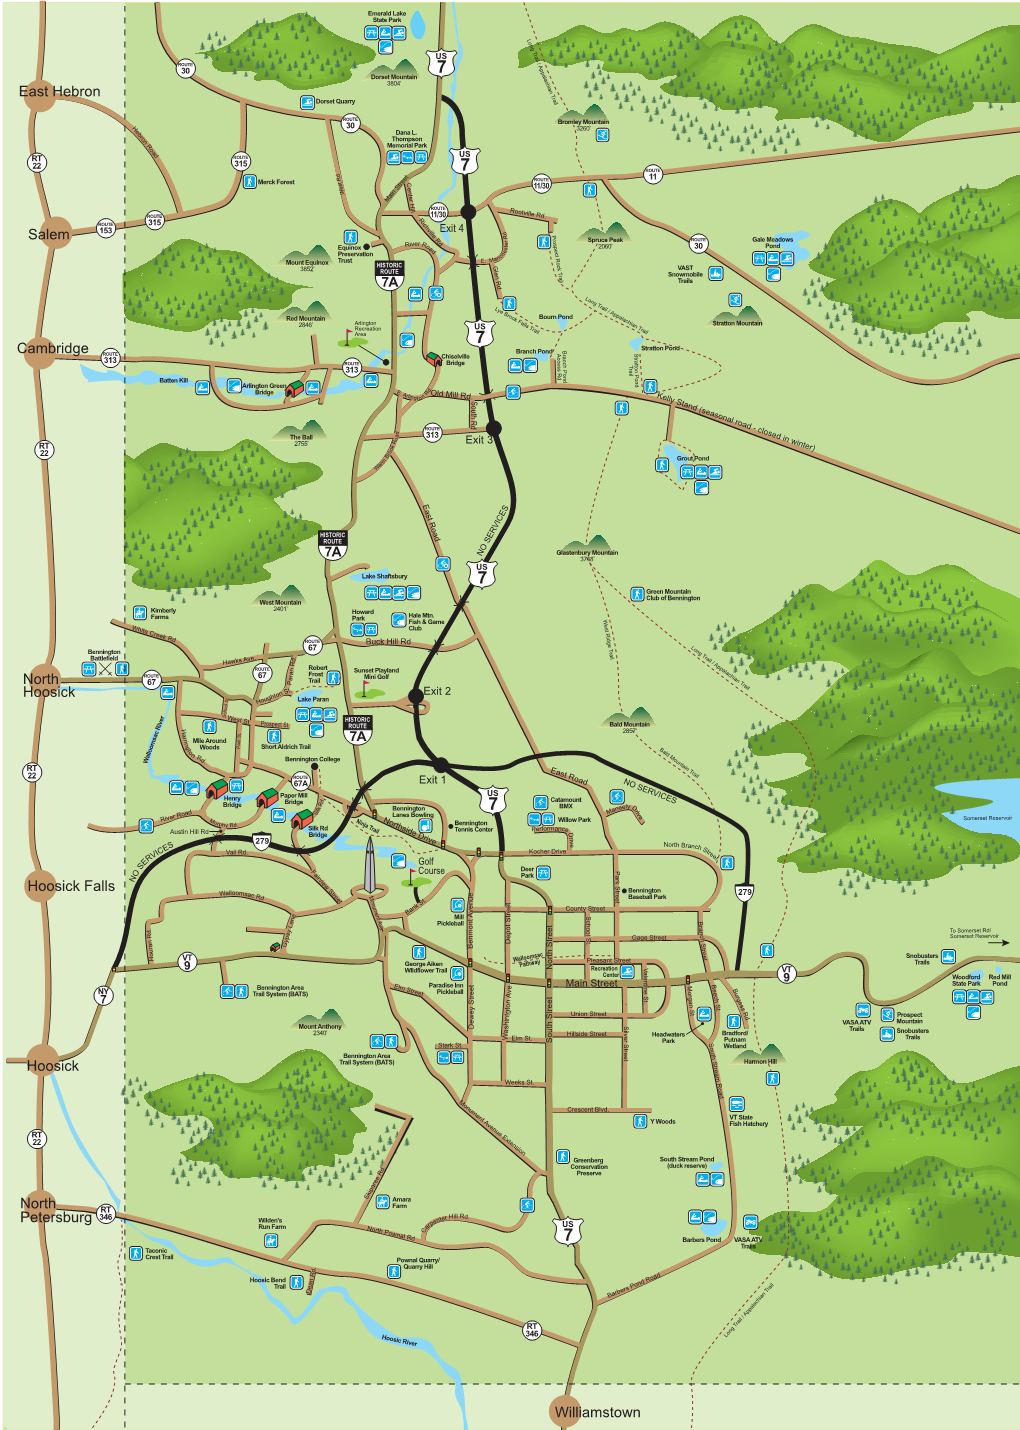 Regional Bennington Recreation Map PDF with Clickable Links Embedded